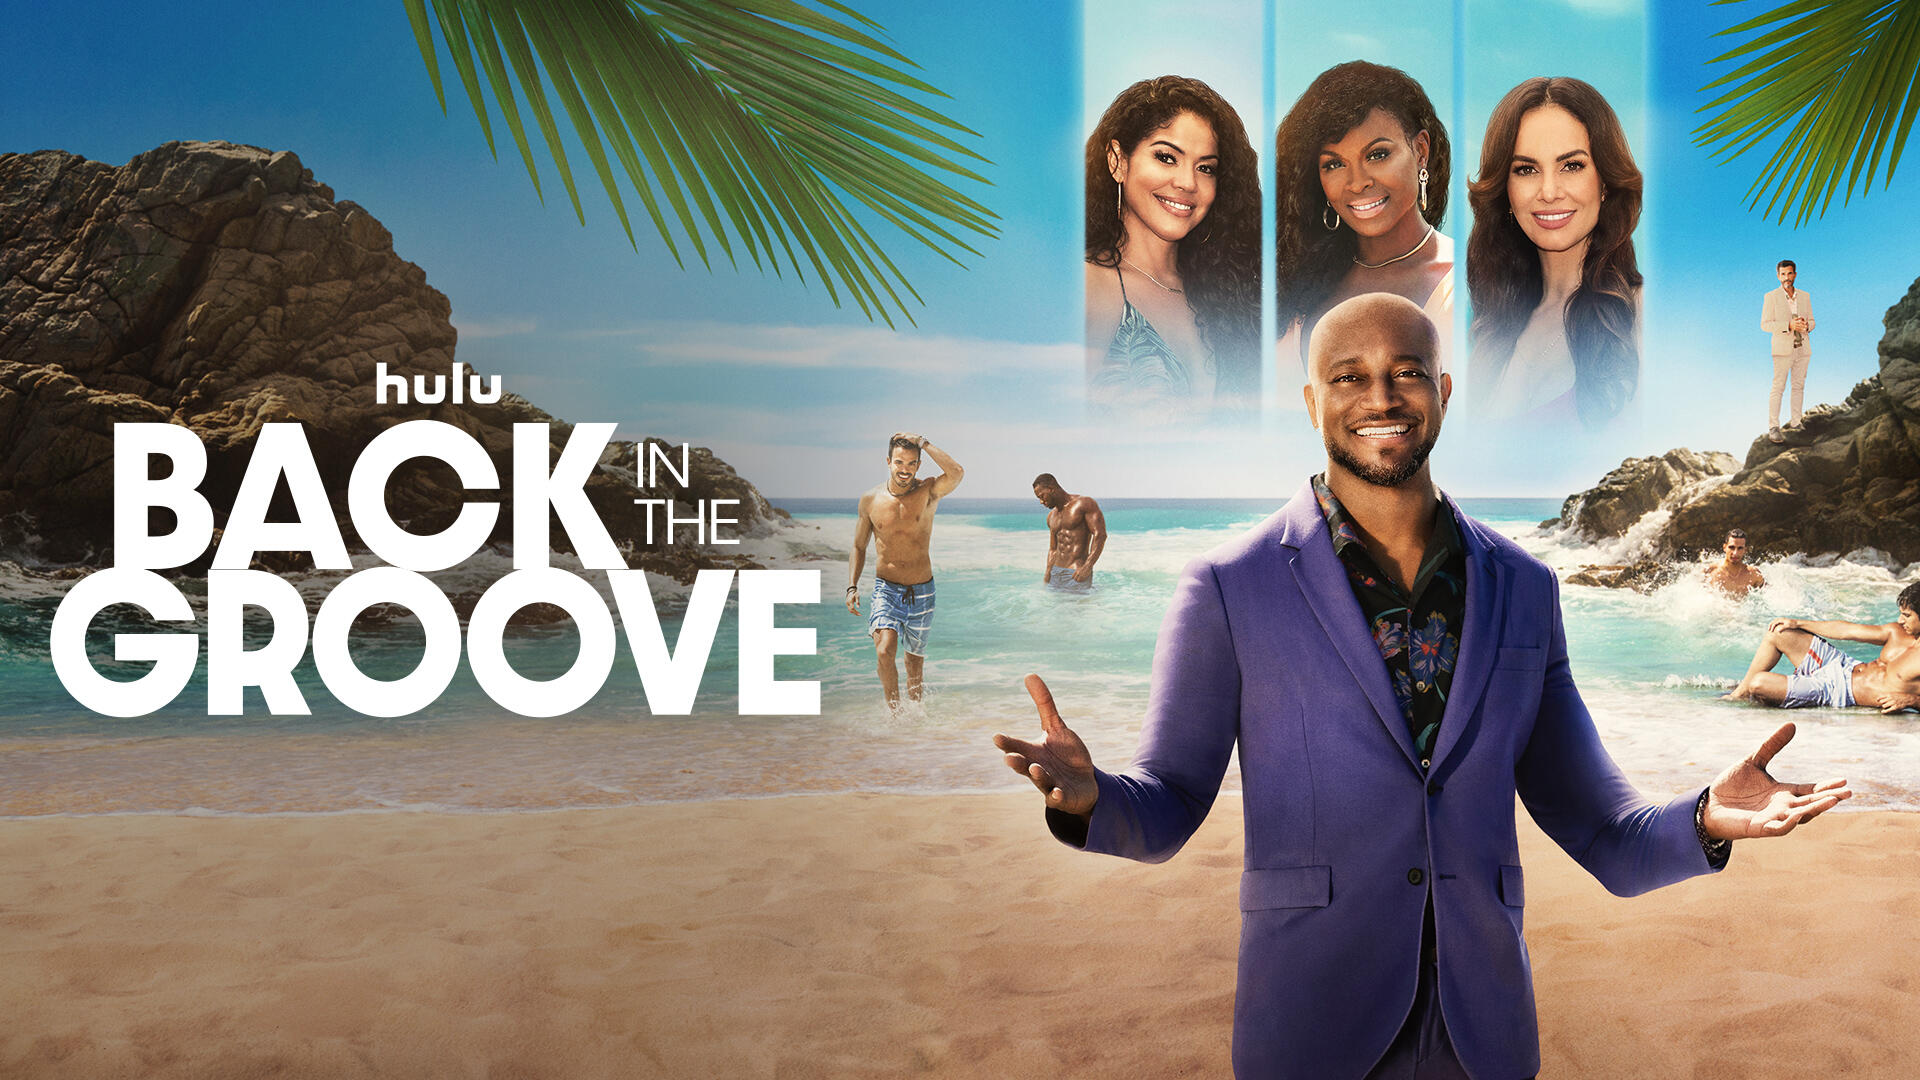 Back in the Groove -- Season 1 -- Three single women in their 40s, all stuck in the grind of their everyday lives, will check OUT of their comfort zones and check INTO The Groove Hotel, a magical resort on the beautiful island of the Dominican Republic - where the goal is to rediscover their youth, live joyously, and hopefully find love with men HALF. THEIR. AGE. As the saying goes, “you can’t fall in love with someone else until you fall in love with yourself!” At the Groove Hotel, these three women will have the opportunity to do both! Whether they find the perfect fling, friendship, true love, or something in between, this is their chance to take charge and break through the double standards older women face every day. And they’re going to have a lot of fun doing it! The show is hosted by Taye Diggs, who knows a thing or two about getting into the groove. (Courtesy of Hulu)